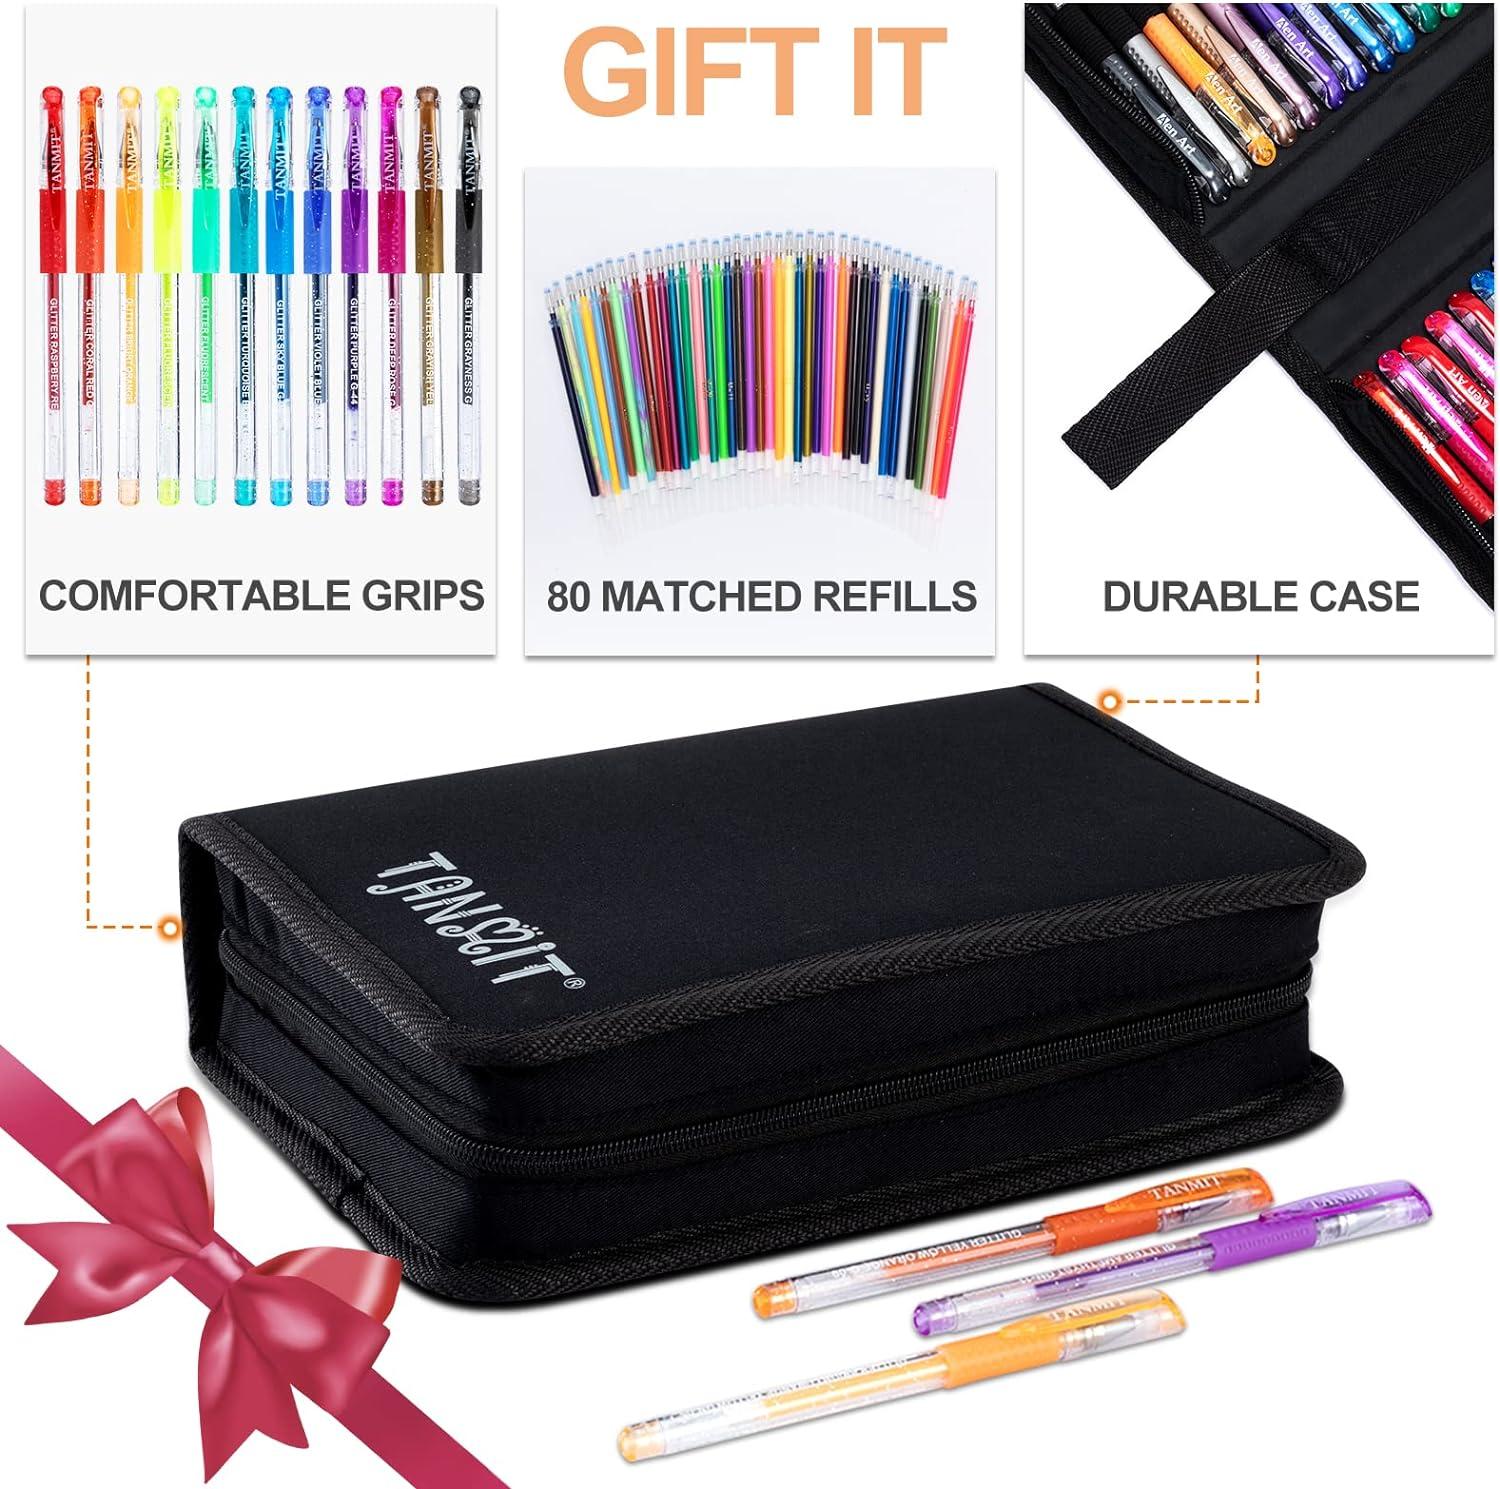 TANMIT Glitter Gel Pens, Glitter Pen with Case for Adults Coloring Books,  160 Pack Artist Colored Gel Markers with 40% More Ink for Drawing